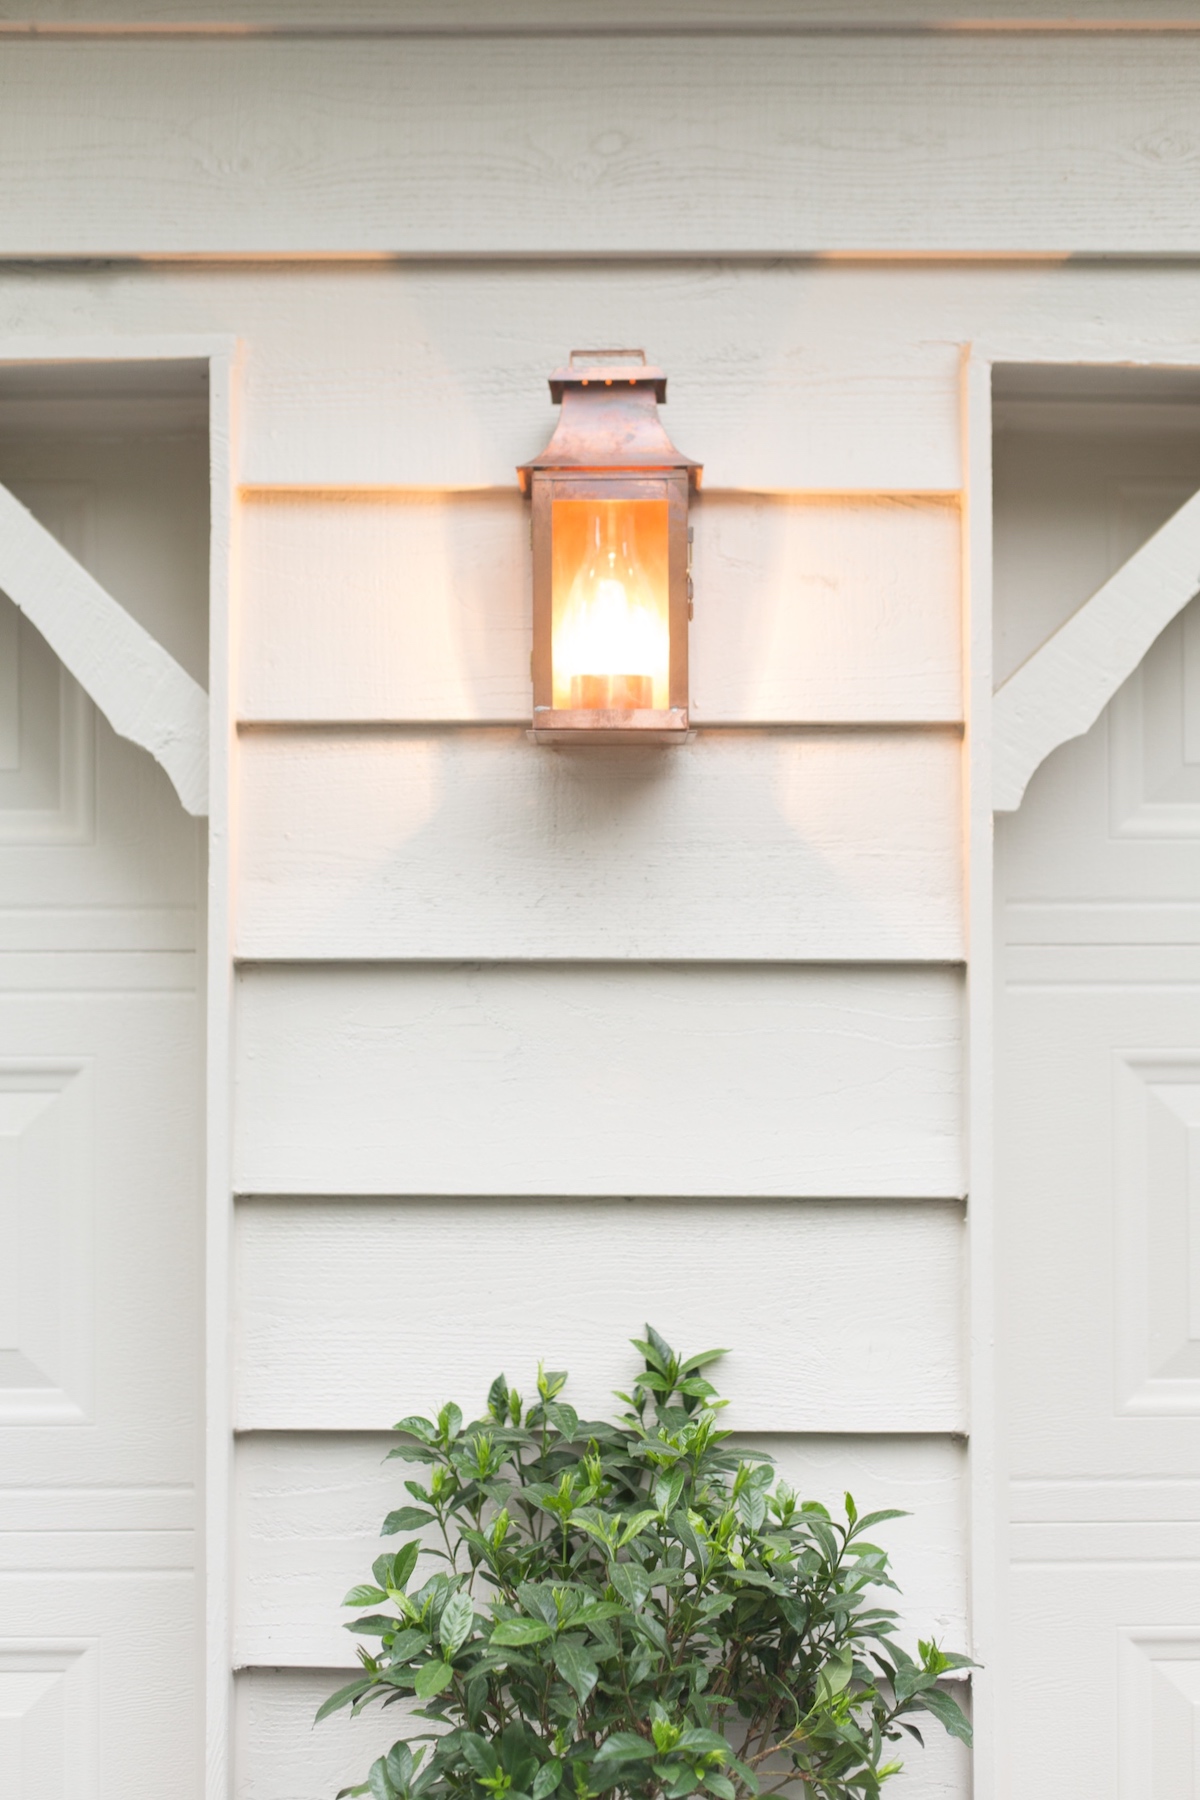 A copper lantern on the white painted exterior of a home.